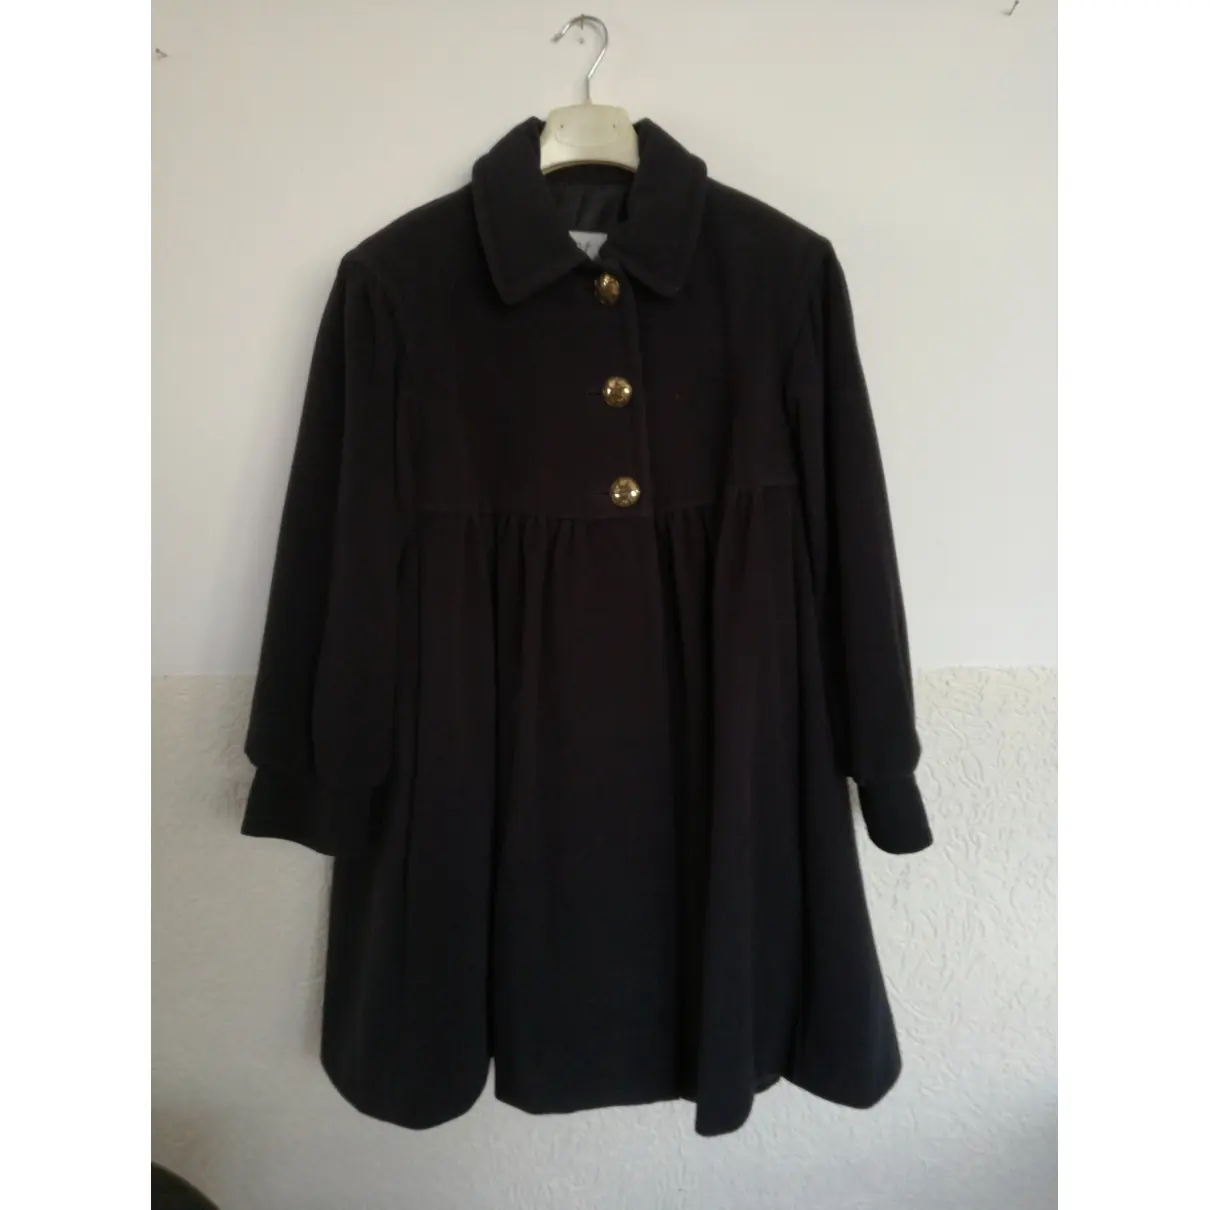 Buy Moschino Cheap And Chic Wool peacoat online - Vintage